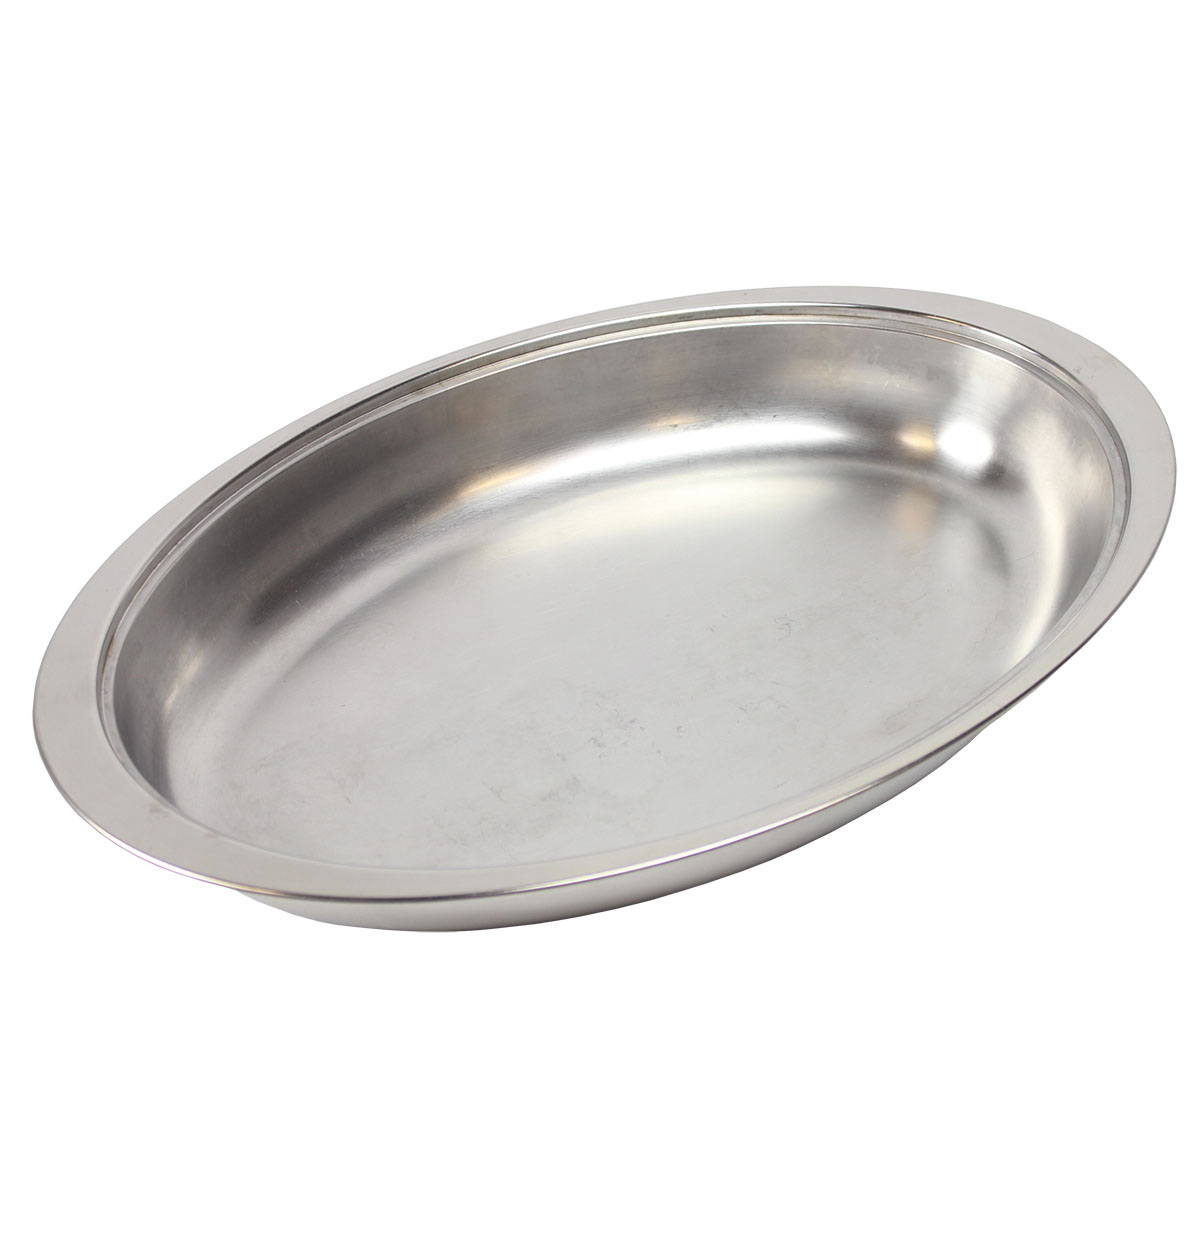 Chafer Pan Oval 